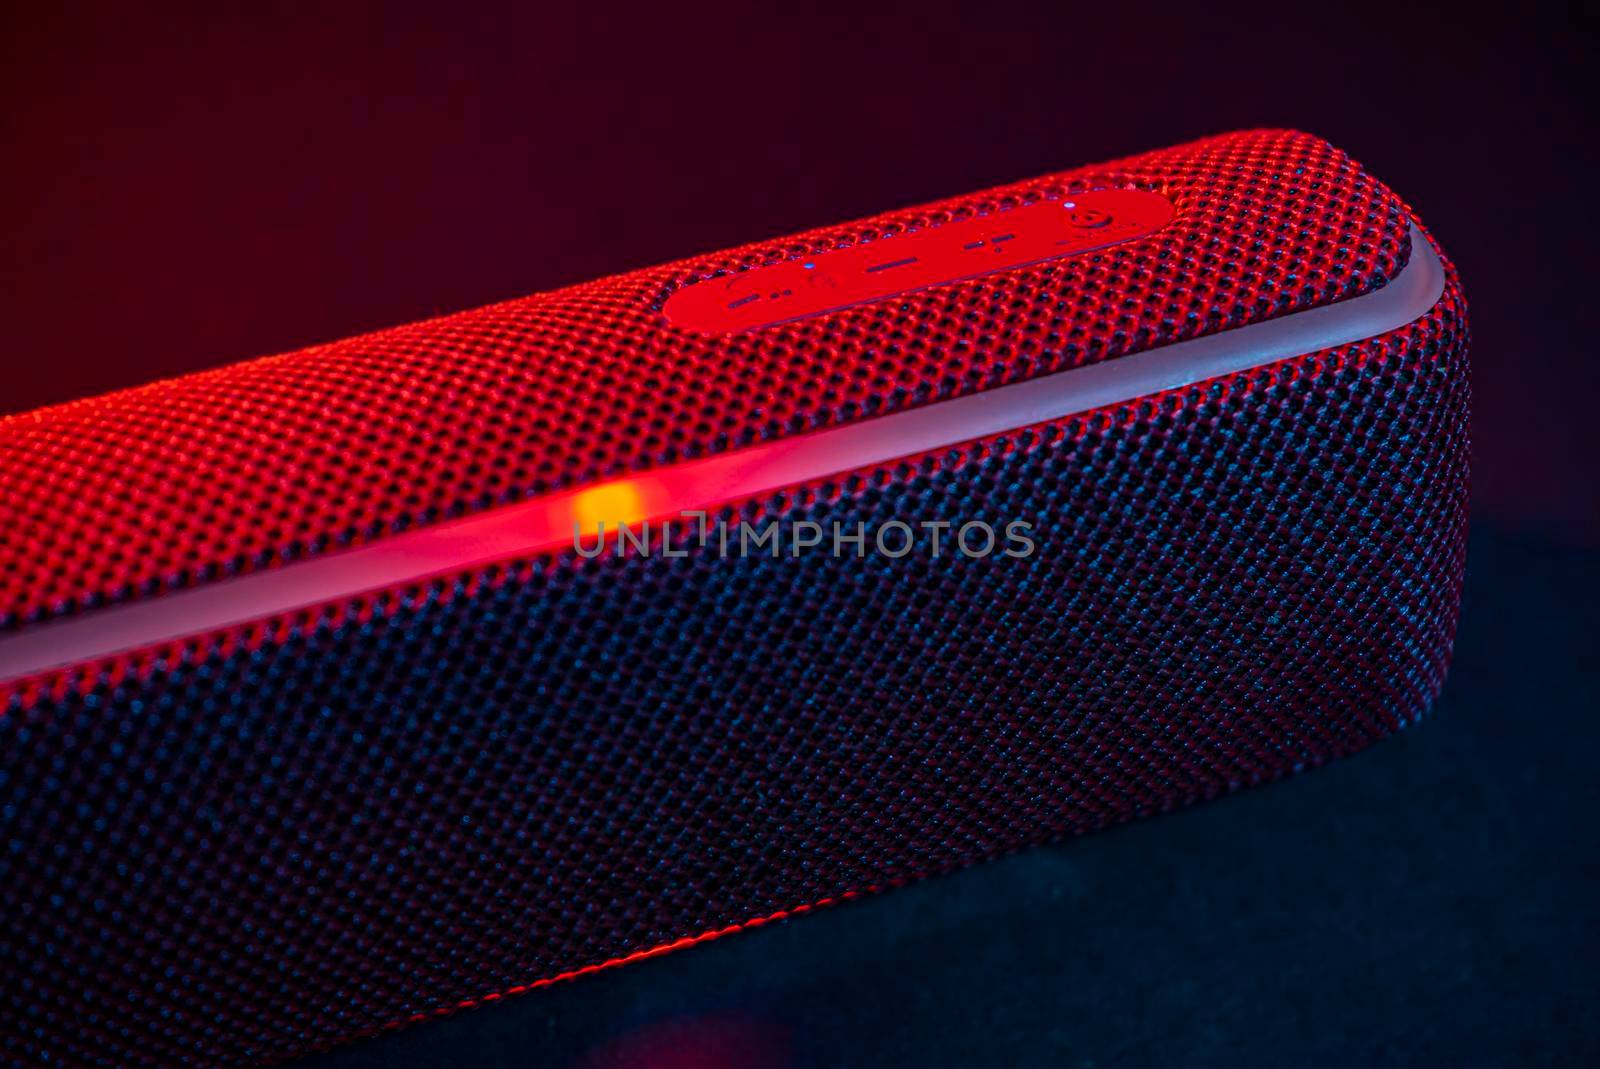 Portable bluetooth speaker 2 by pippocarlot